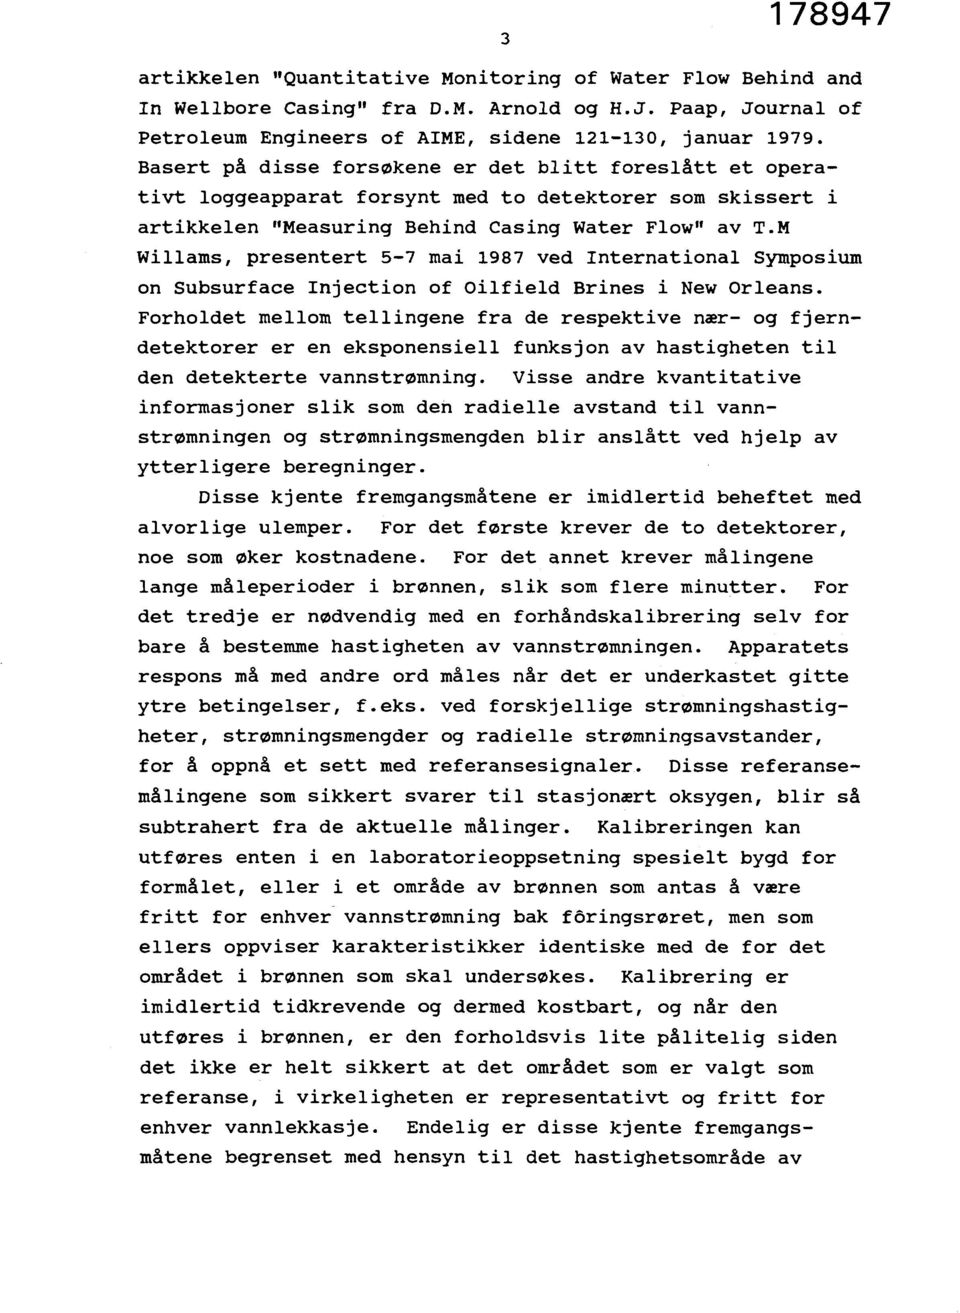 M Willams, presentert 5-7 mai 1987 ved International Symposium on Subsurface Injection of Oilfield Brines i New Orleans.